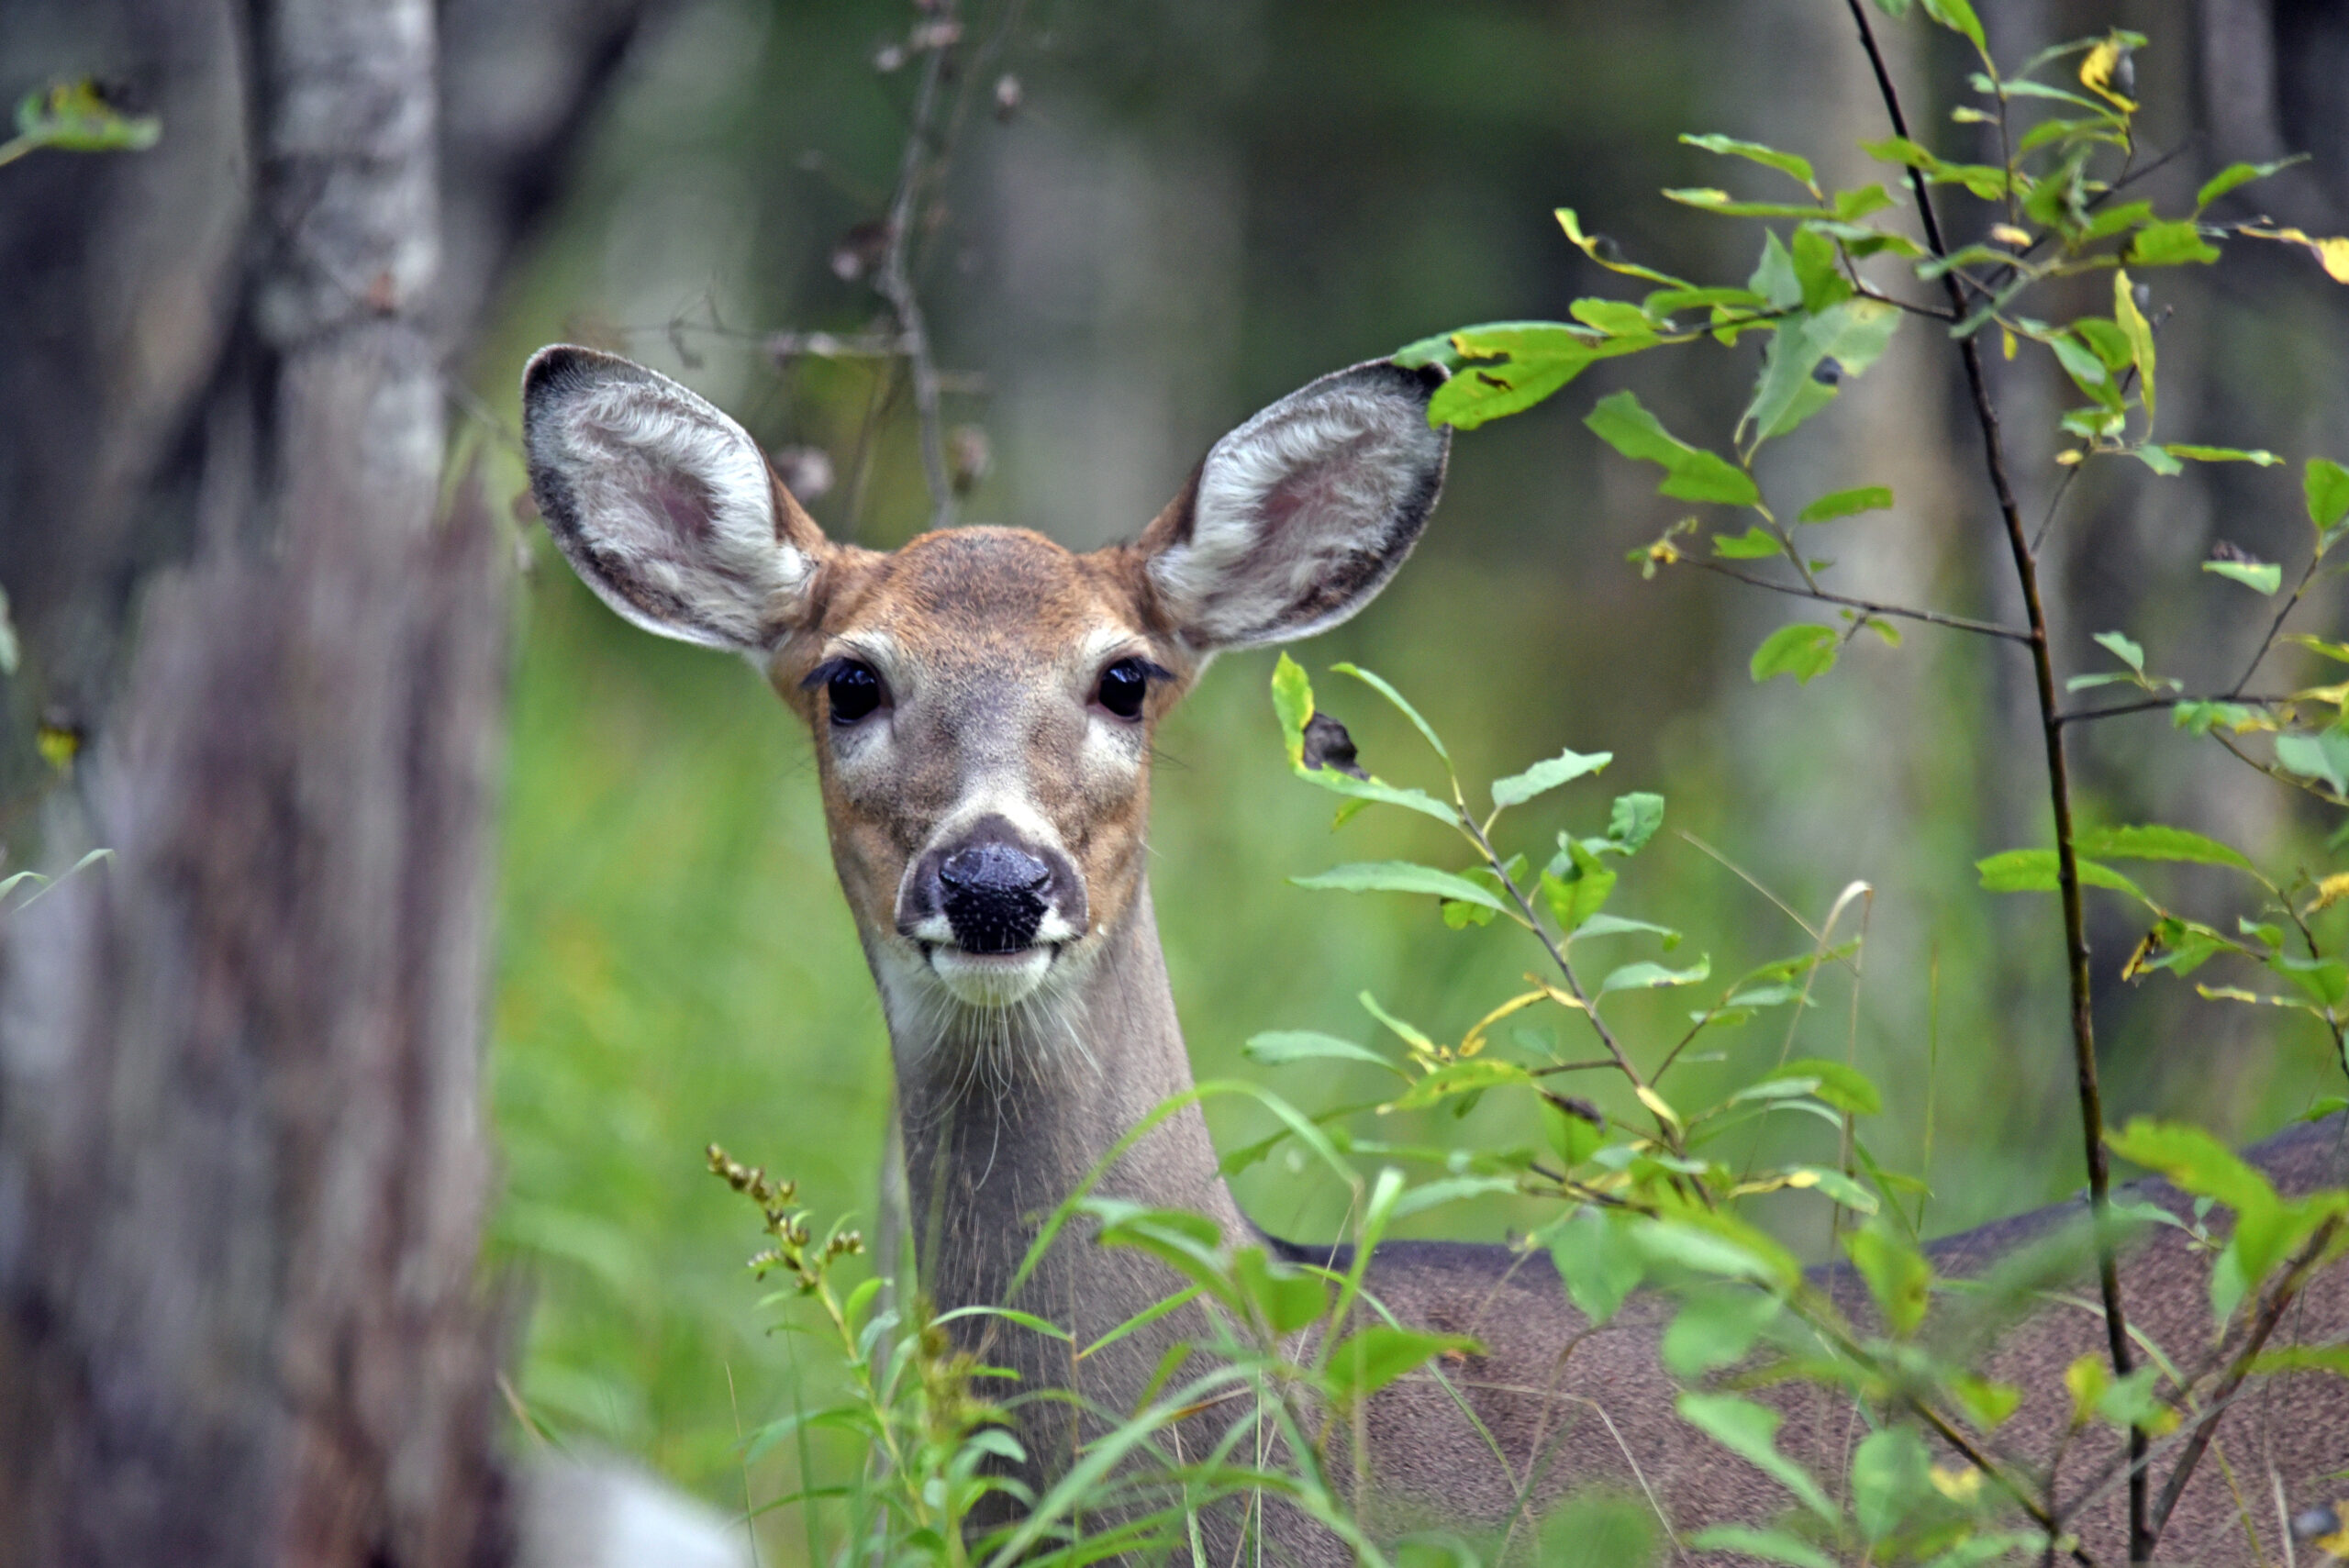 Deer numbers in urban and suburban parks are through the roof in D.C. and Maryland.